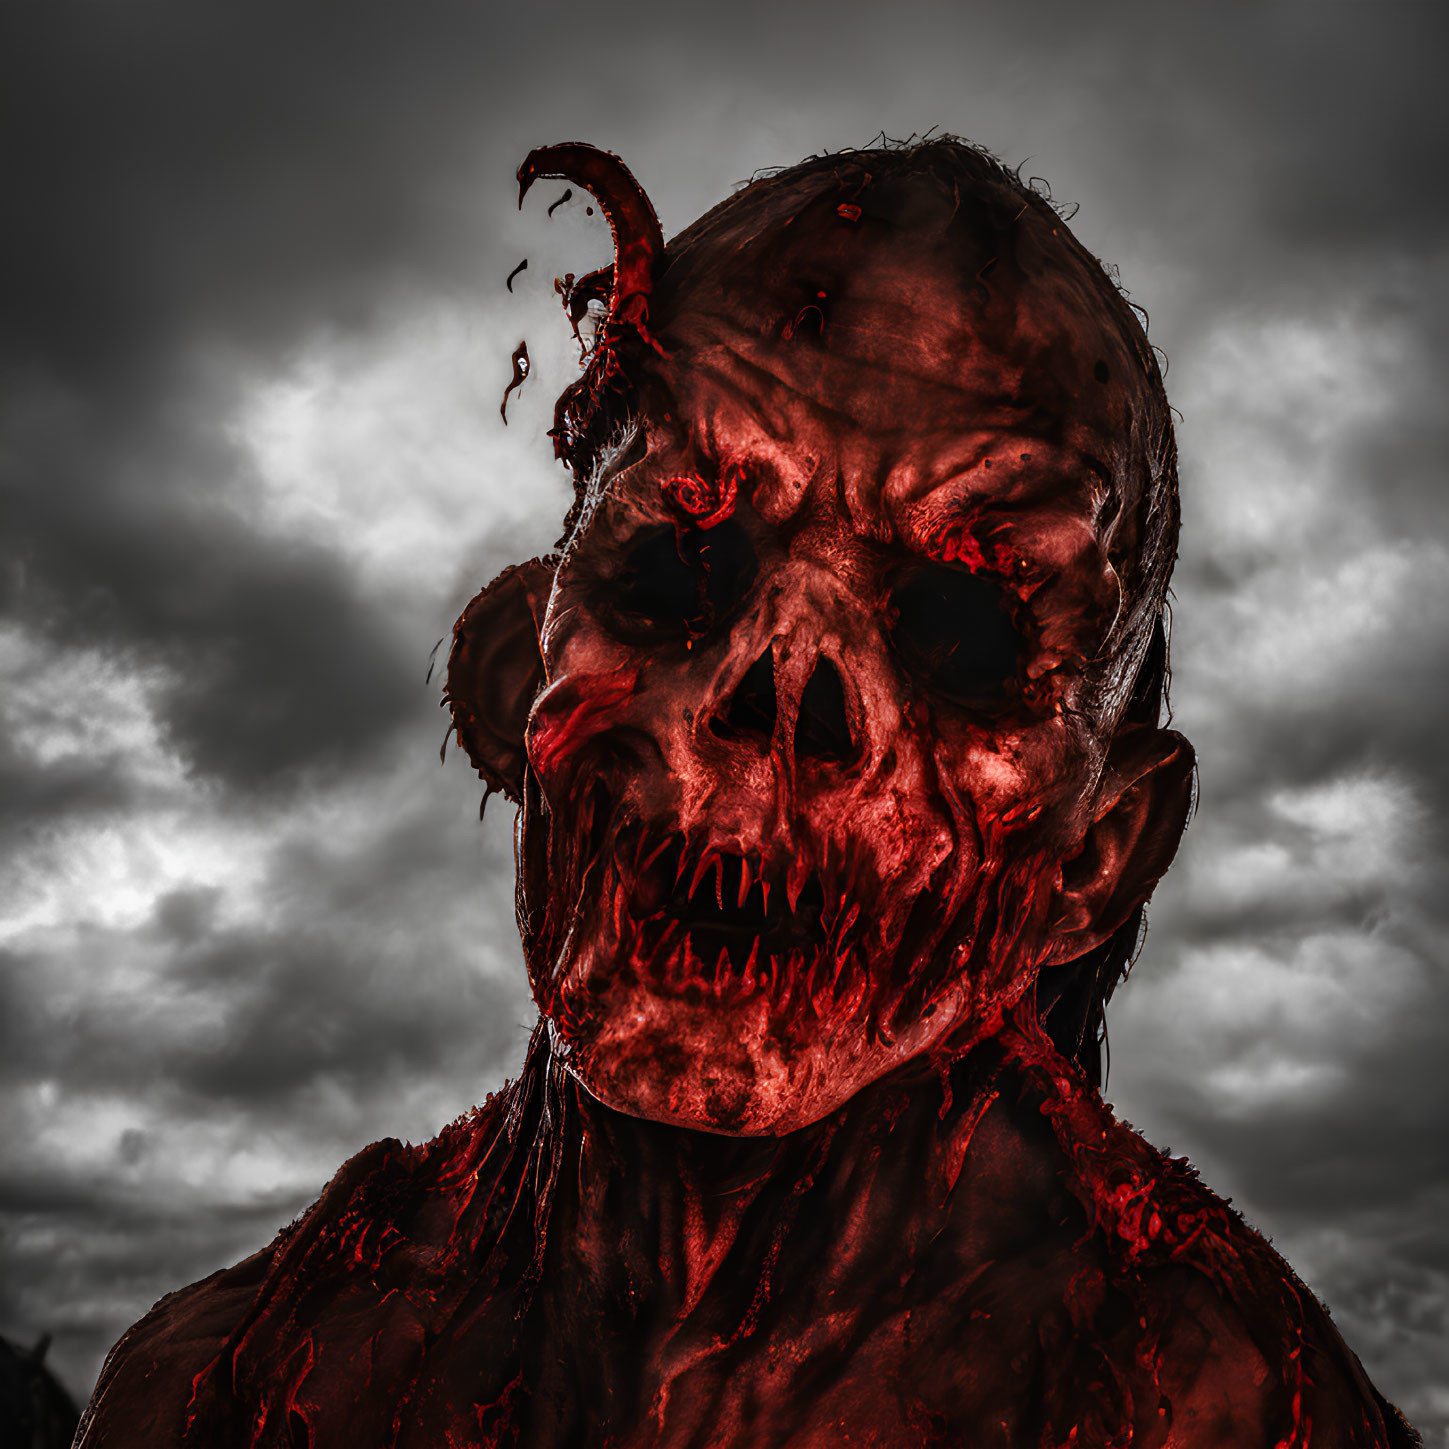 Blood-covered creature with glowing red eyes and eerie appendage in stormy sky